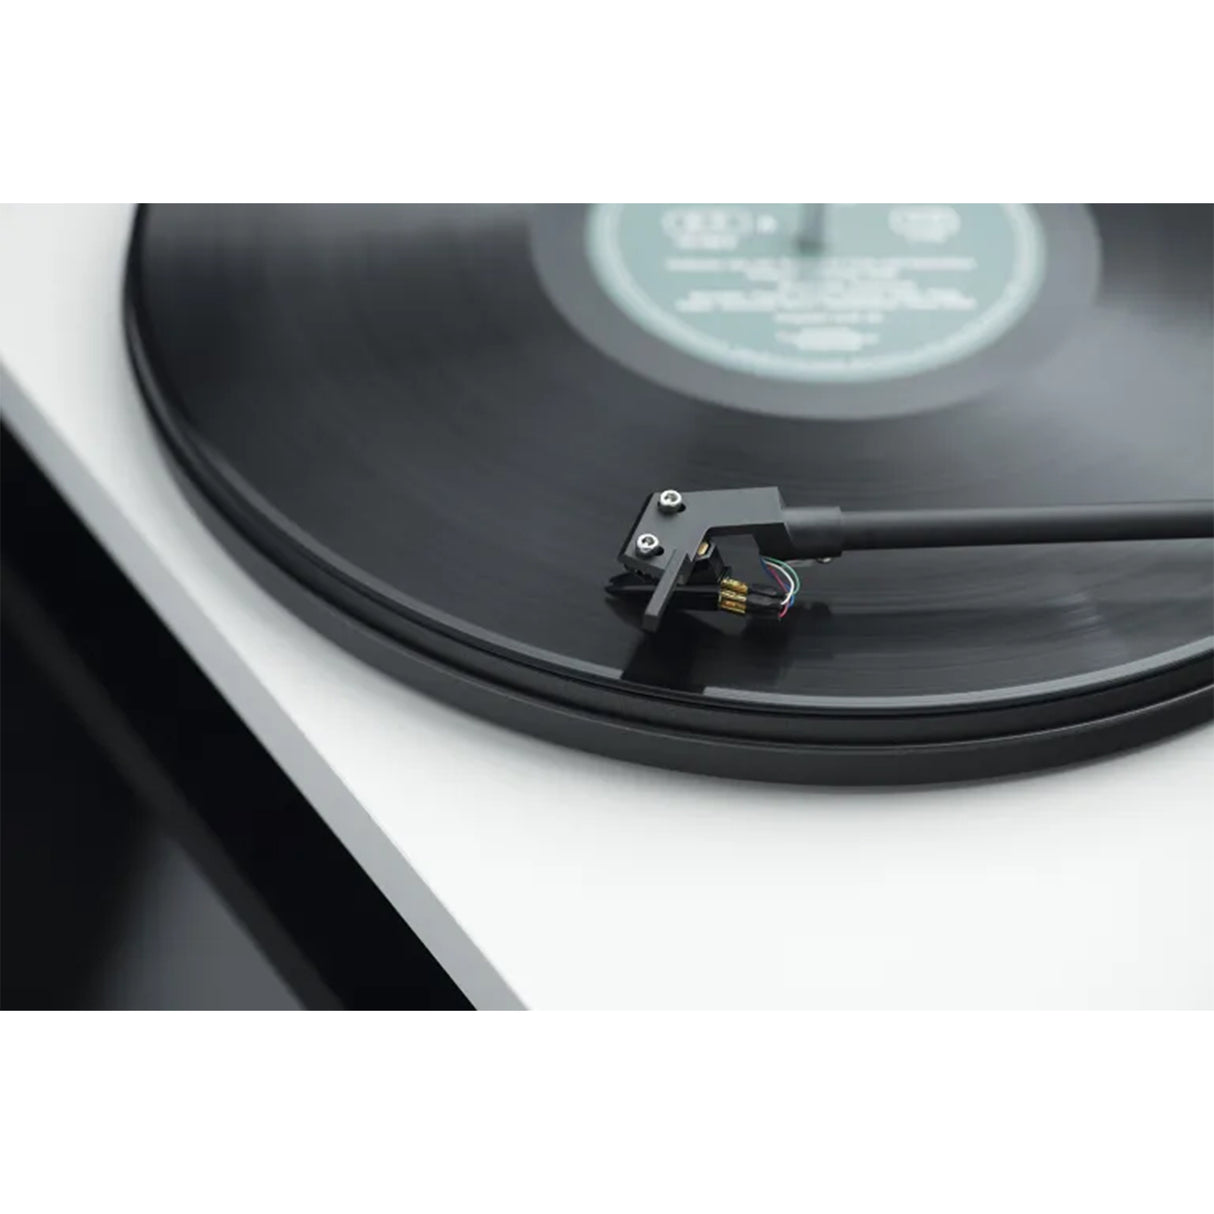 Pro-ject Primary E Turntable with Phono (Black)